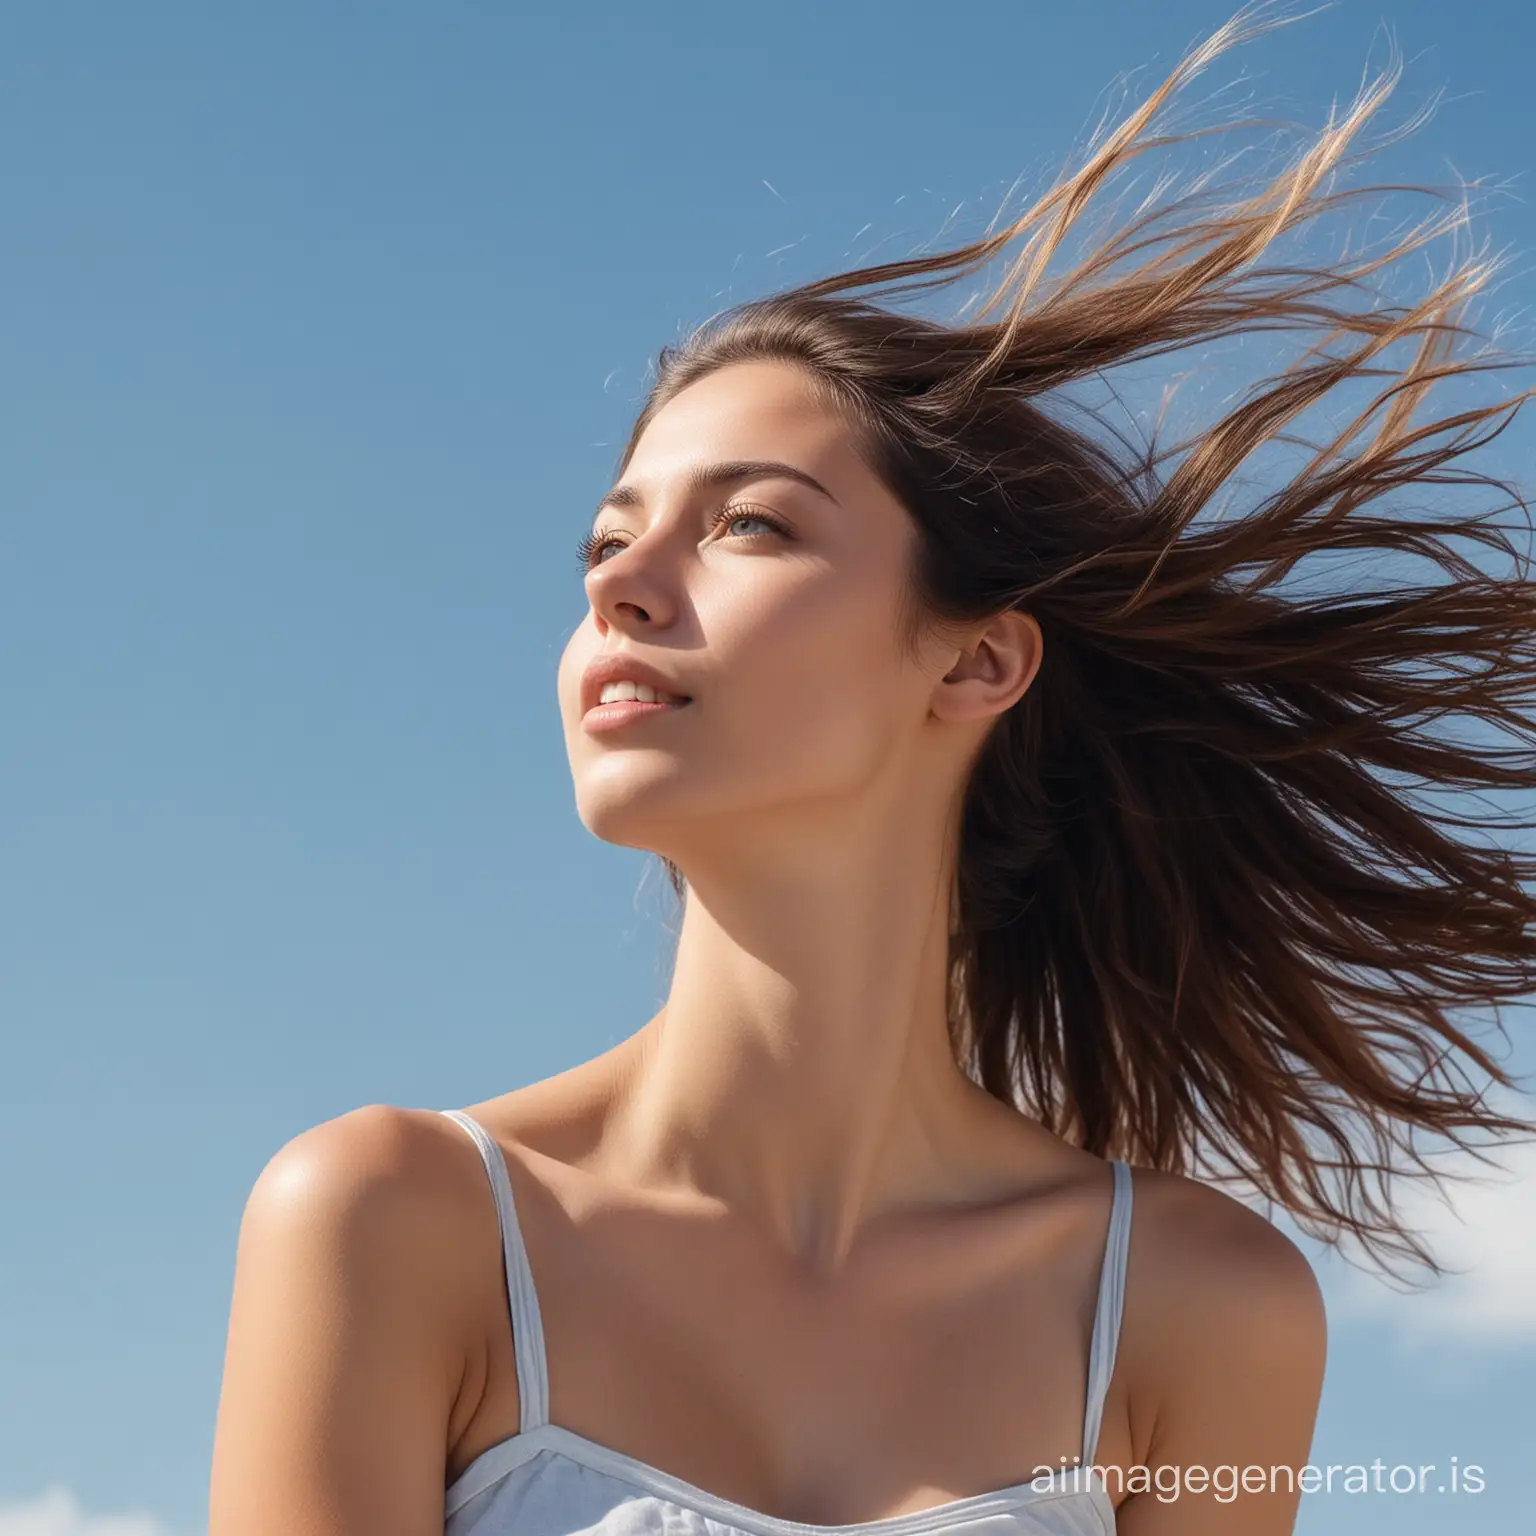 Calm-and-Thoughtful-Young-Woman-Reaching-Out-Against-Clear-Blue-Sky